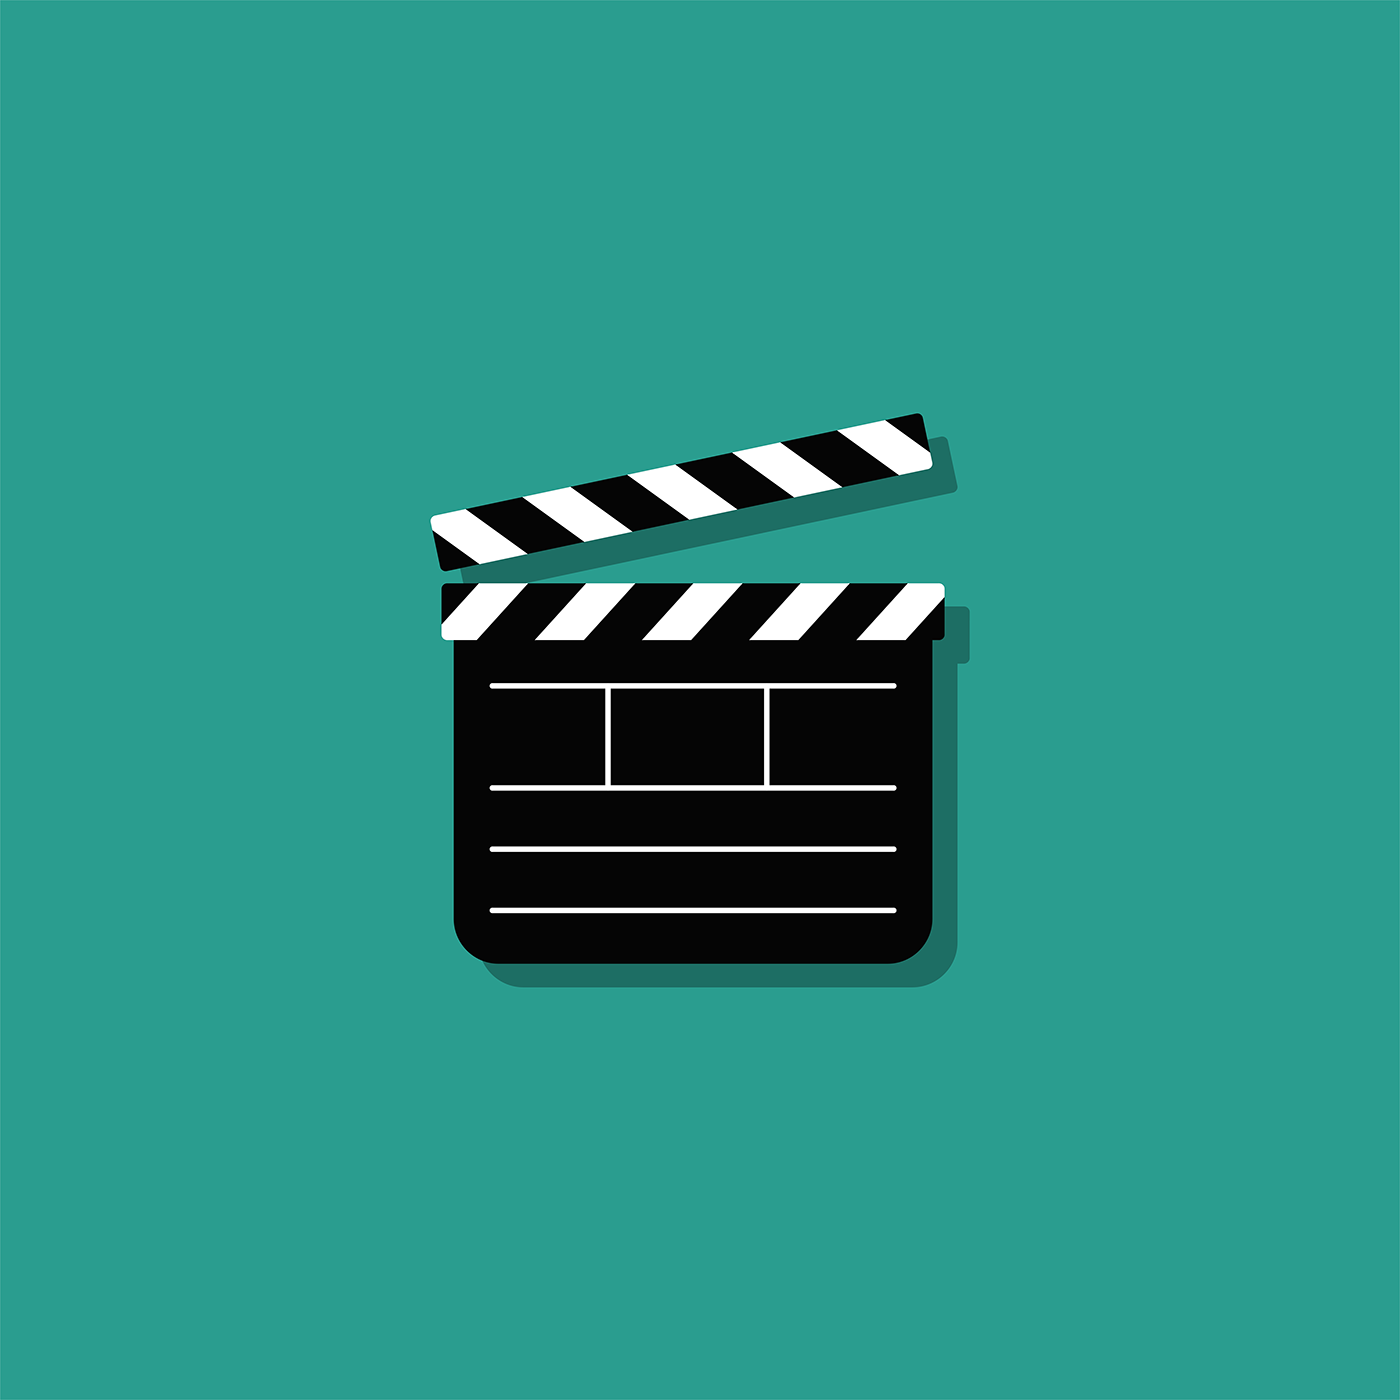 cinema related icons cinema related objects cinema related things cinema series clapperboard clapperboard icon icons illustrations Movie icons vector